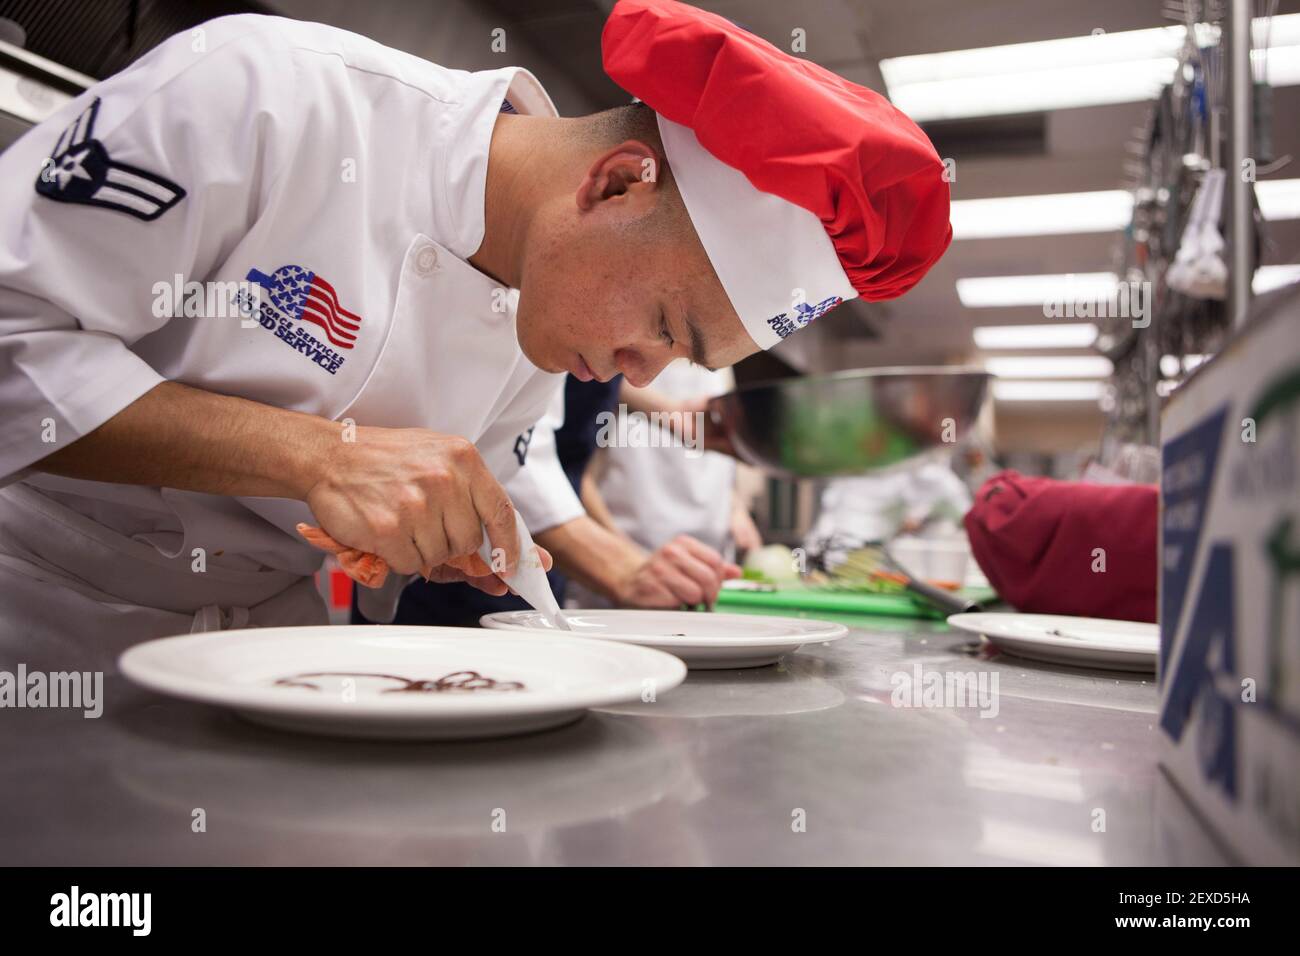 Airman 1st Class Ruel Abastas, a 90th Force Support Squadron chef, decorates a plate with chocolate syrup for a dessert dish during an 'Iron Chef' competition at the Chadwell Dining Facility on F.E. Warren Air Force Base, Wyo., Aug. 27, 2015. Chefs from the 90th FSS had to create an entree incorporating the secret ingredient, cheese crackers with peanut butter, along with a dessert dish within the hour time limit. (Photo by Lan Kim/U.S. Air Force) *** Please Use Credit from Credit Field *** Stock Photo